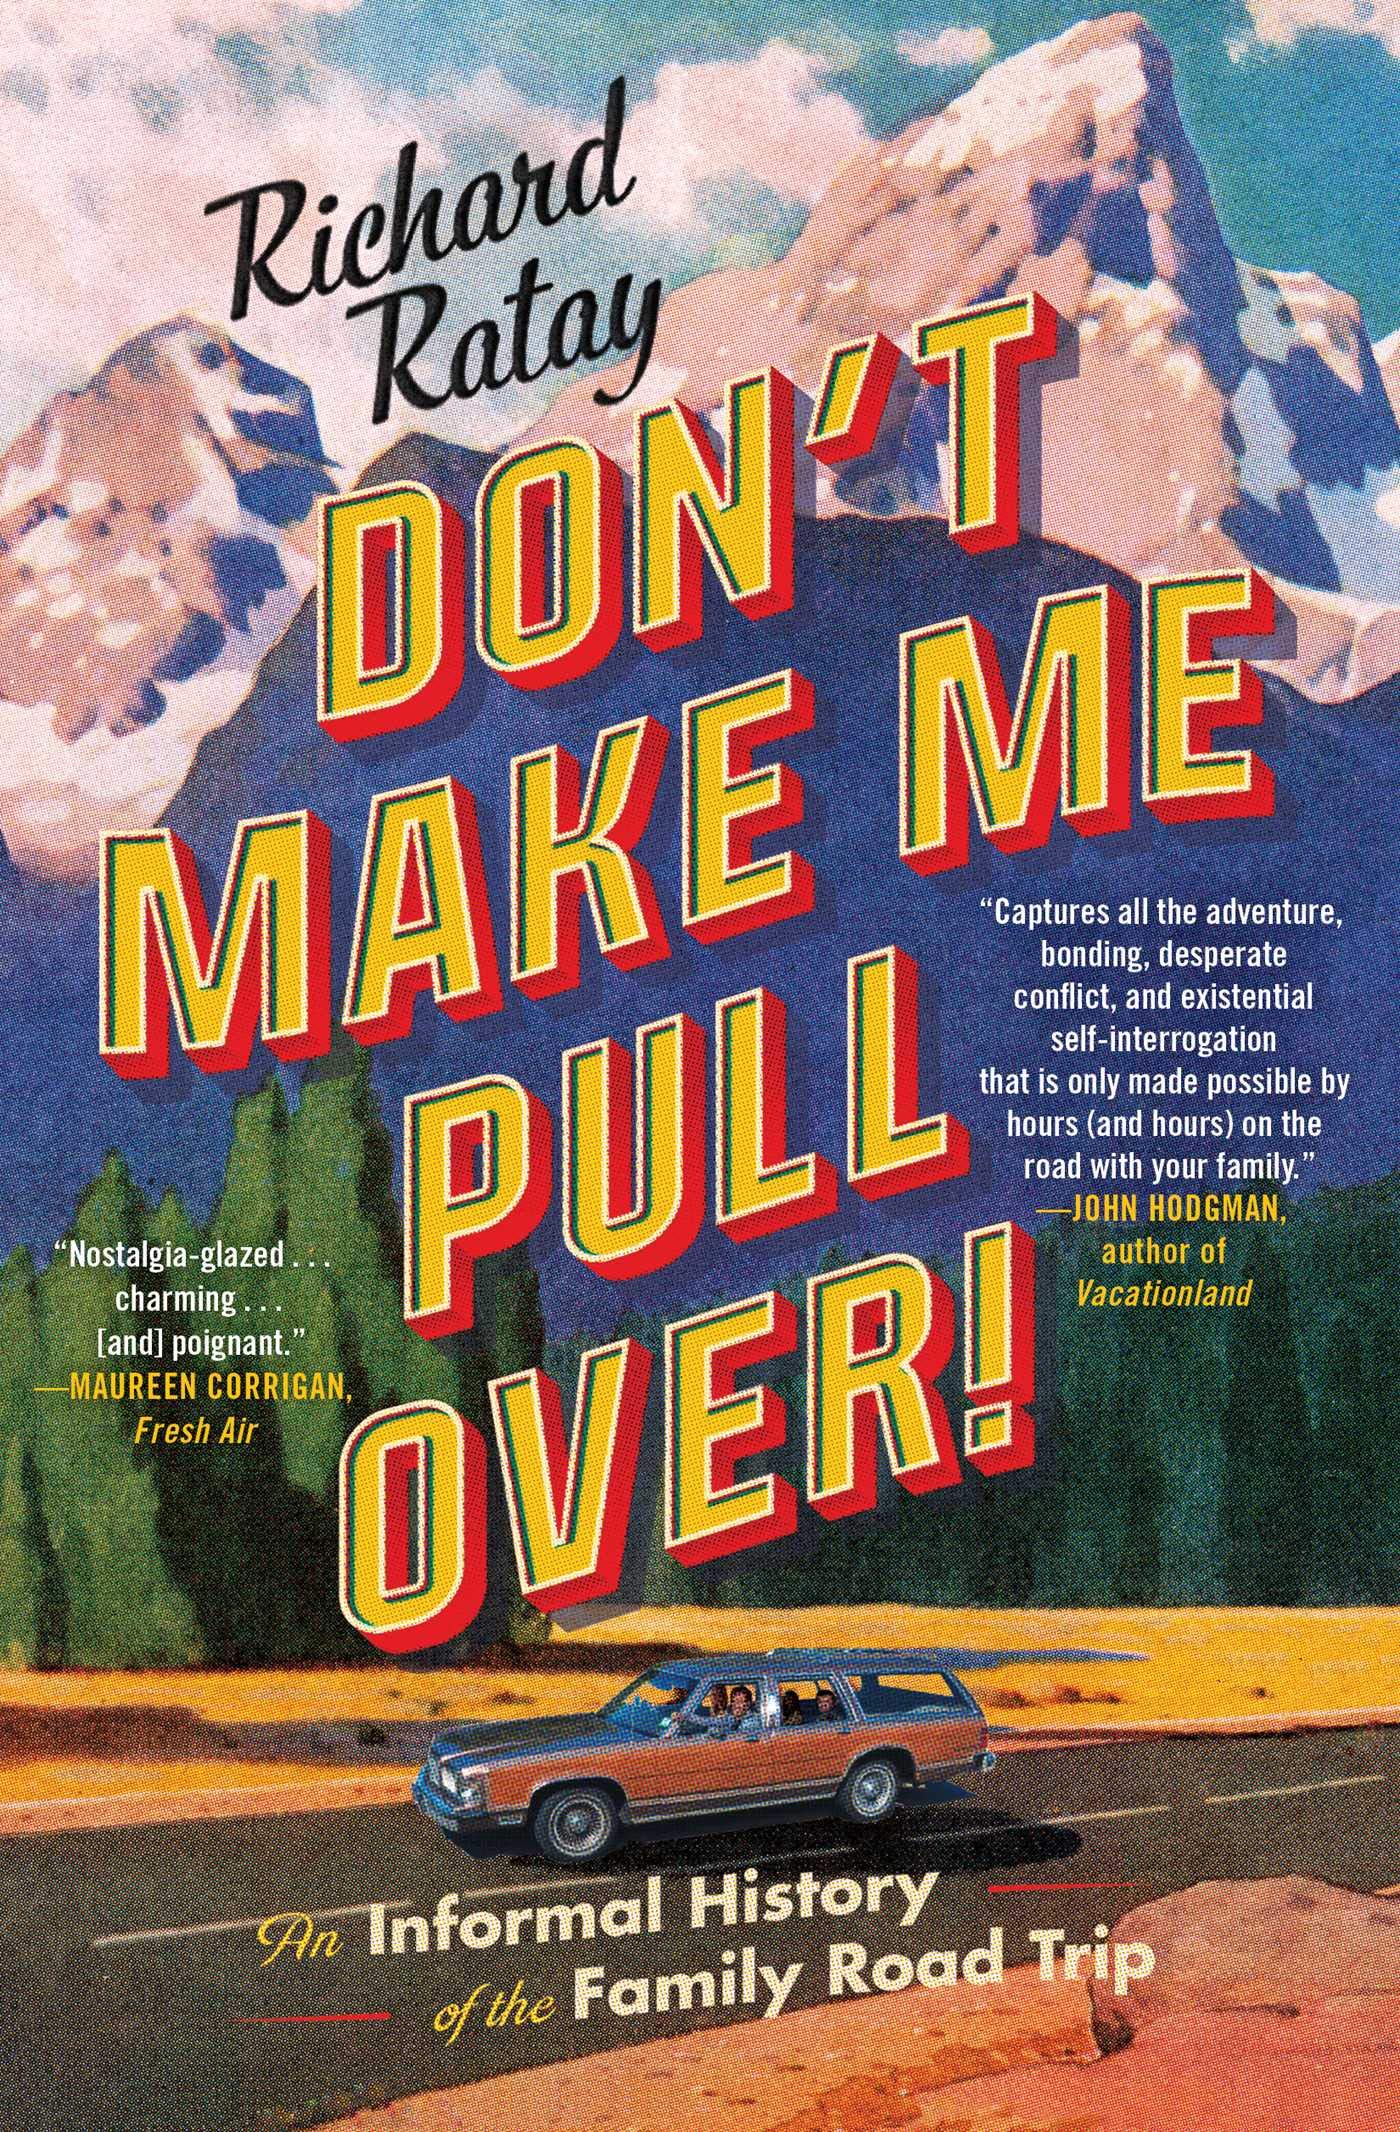 Book Cover-Don't Make Me Pull Over by author Richard Ratay